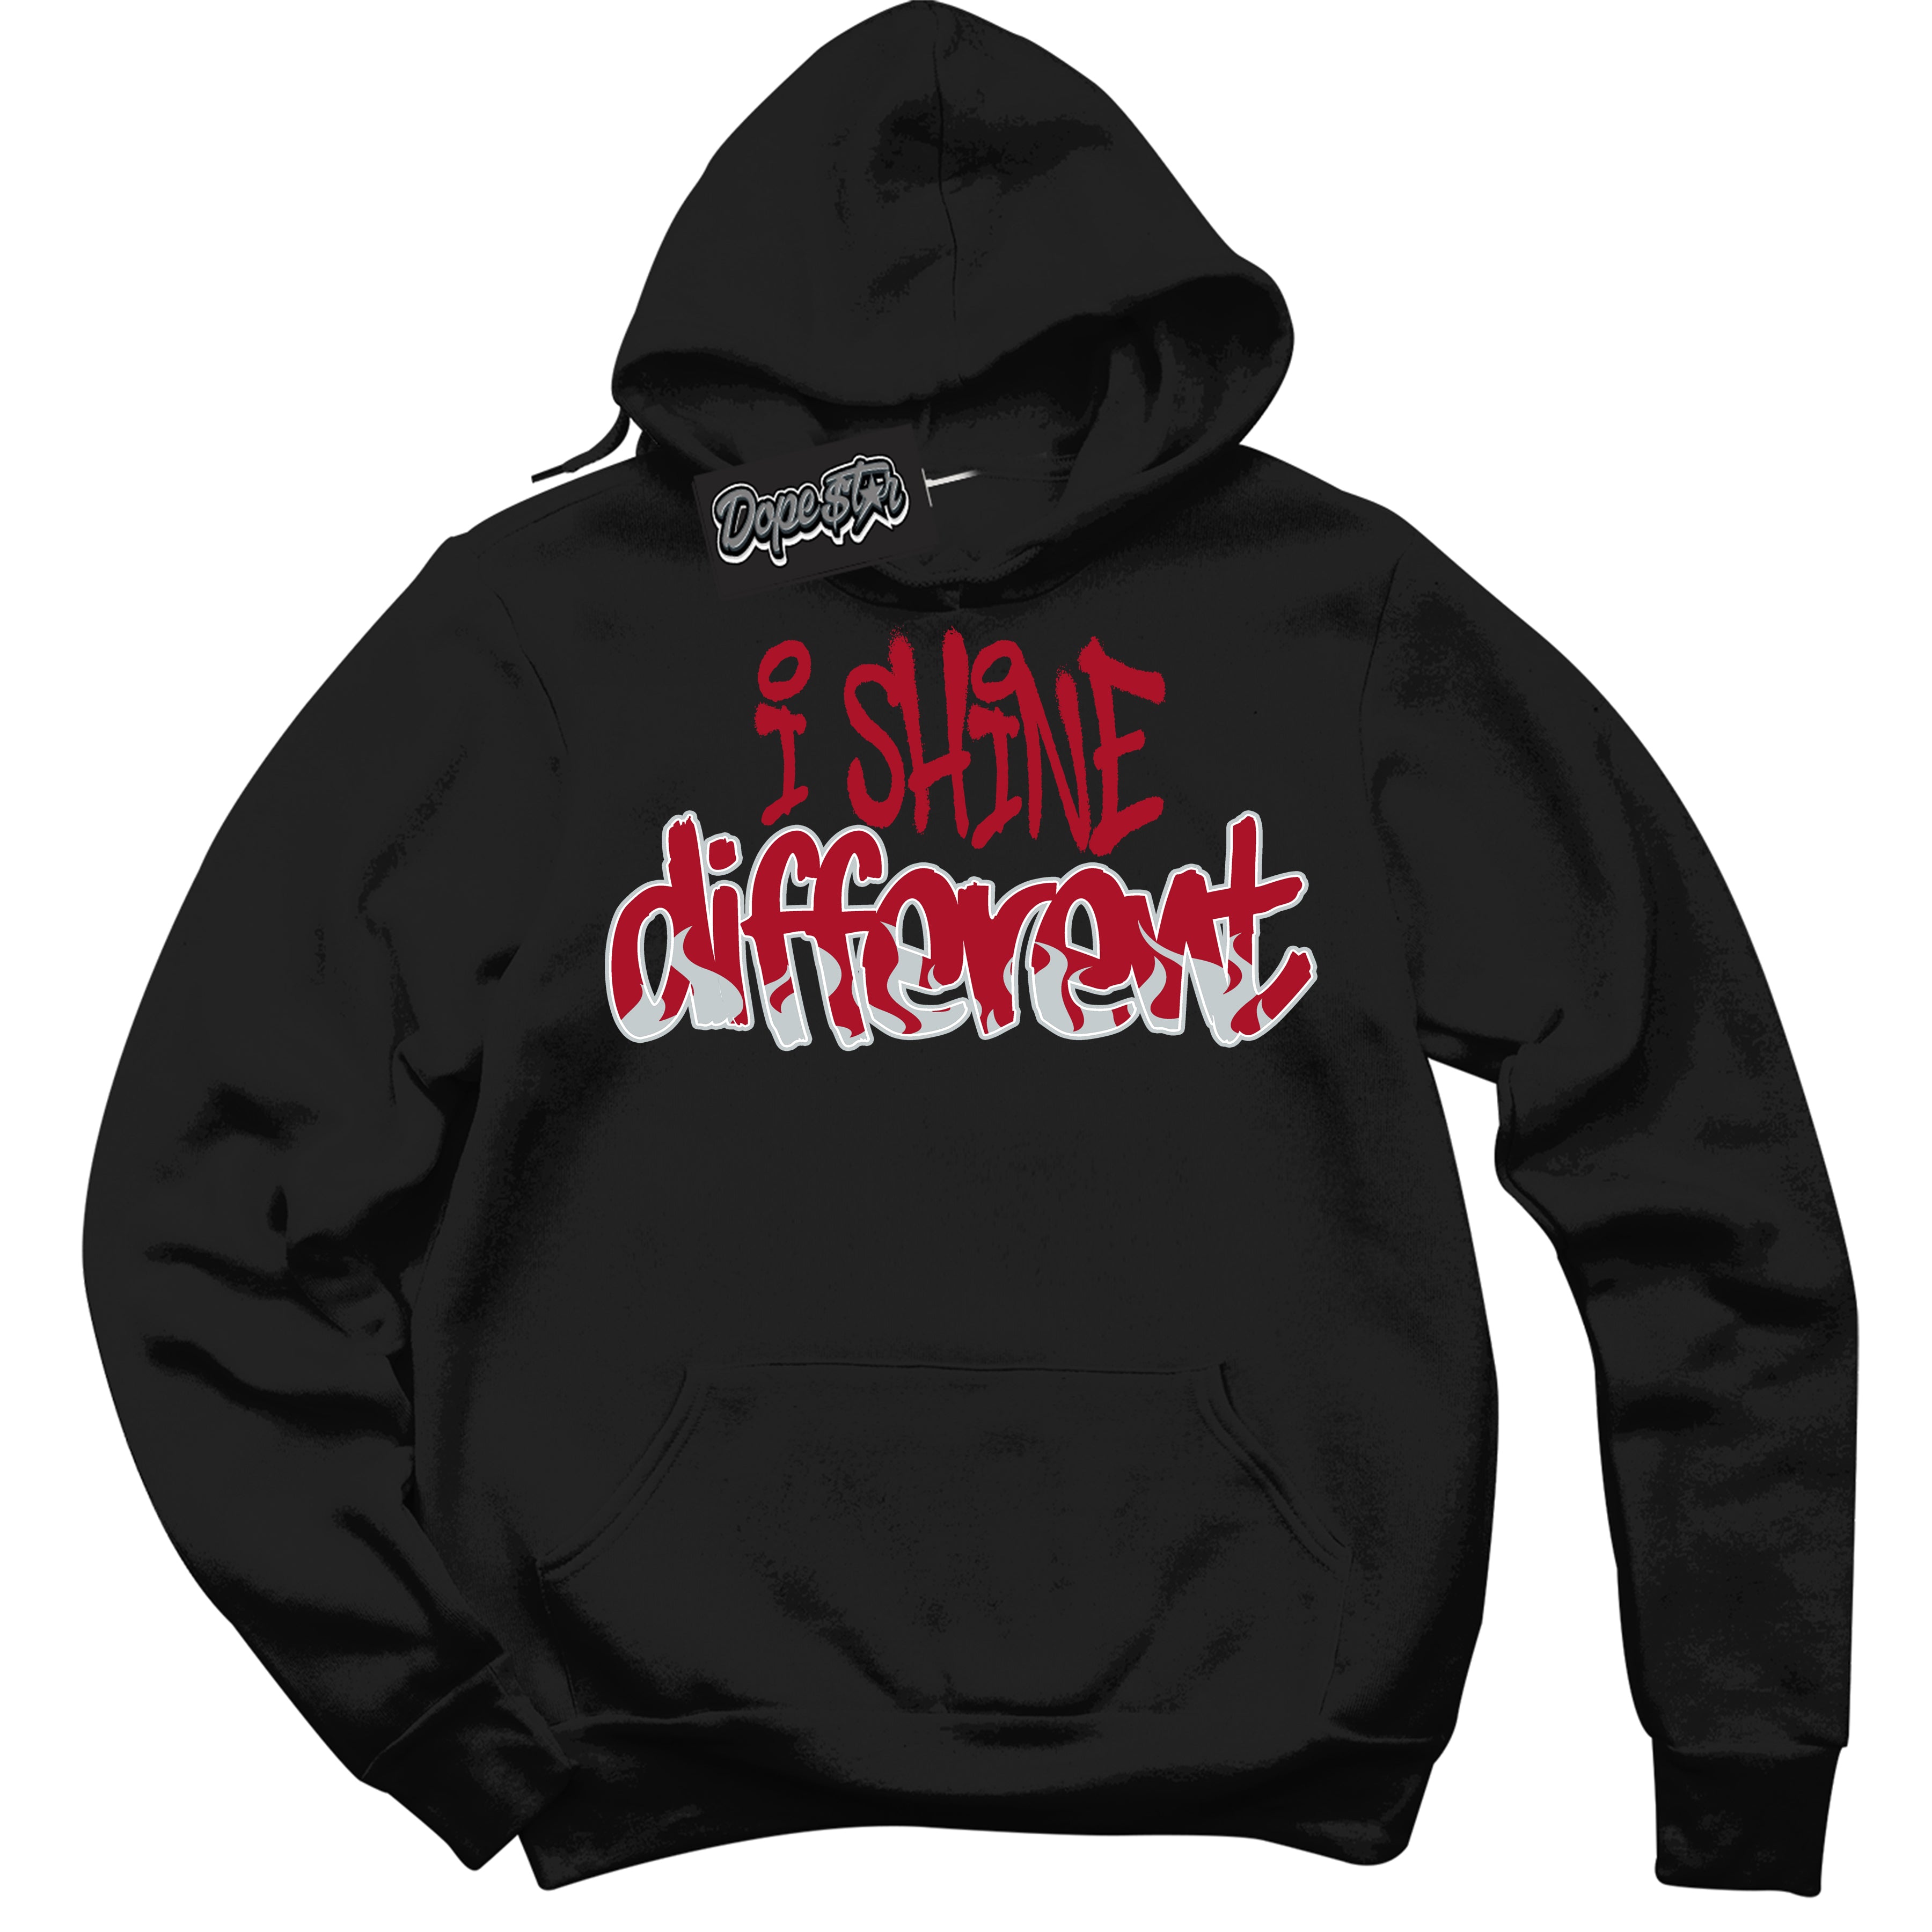 Cool Black Hoodie with “ I Shine Different ”  design that Perfectly Matches  Reverse Ultraman Sneakers.